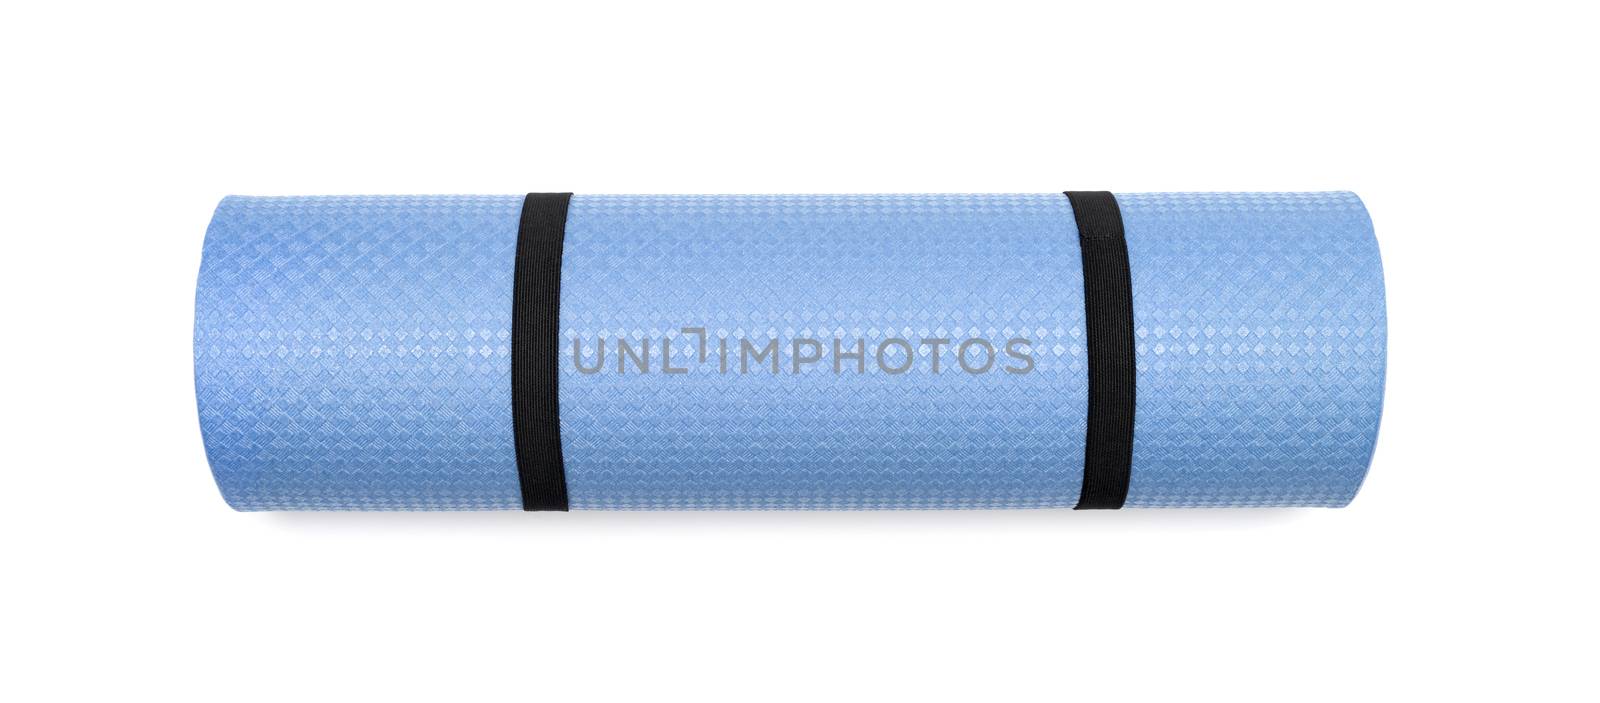 Blue yoga mat for exercise, isolated on white background. by DNKSTUDIO